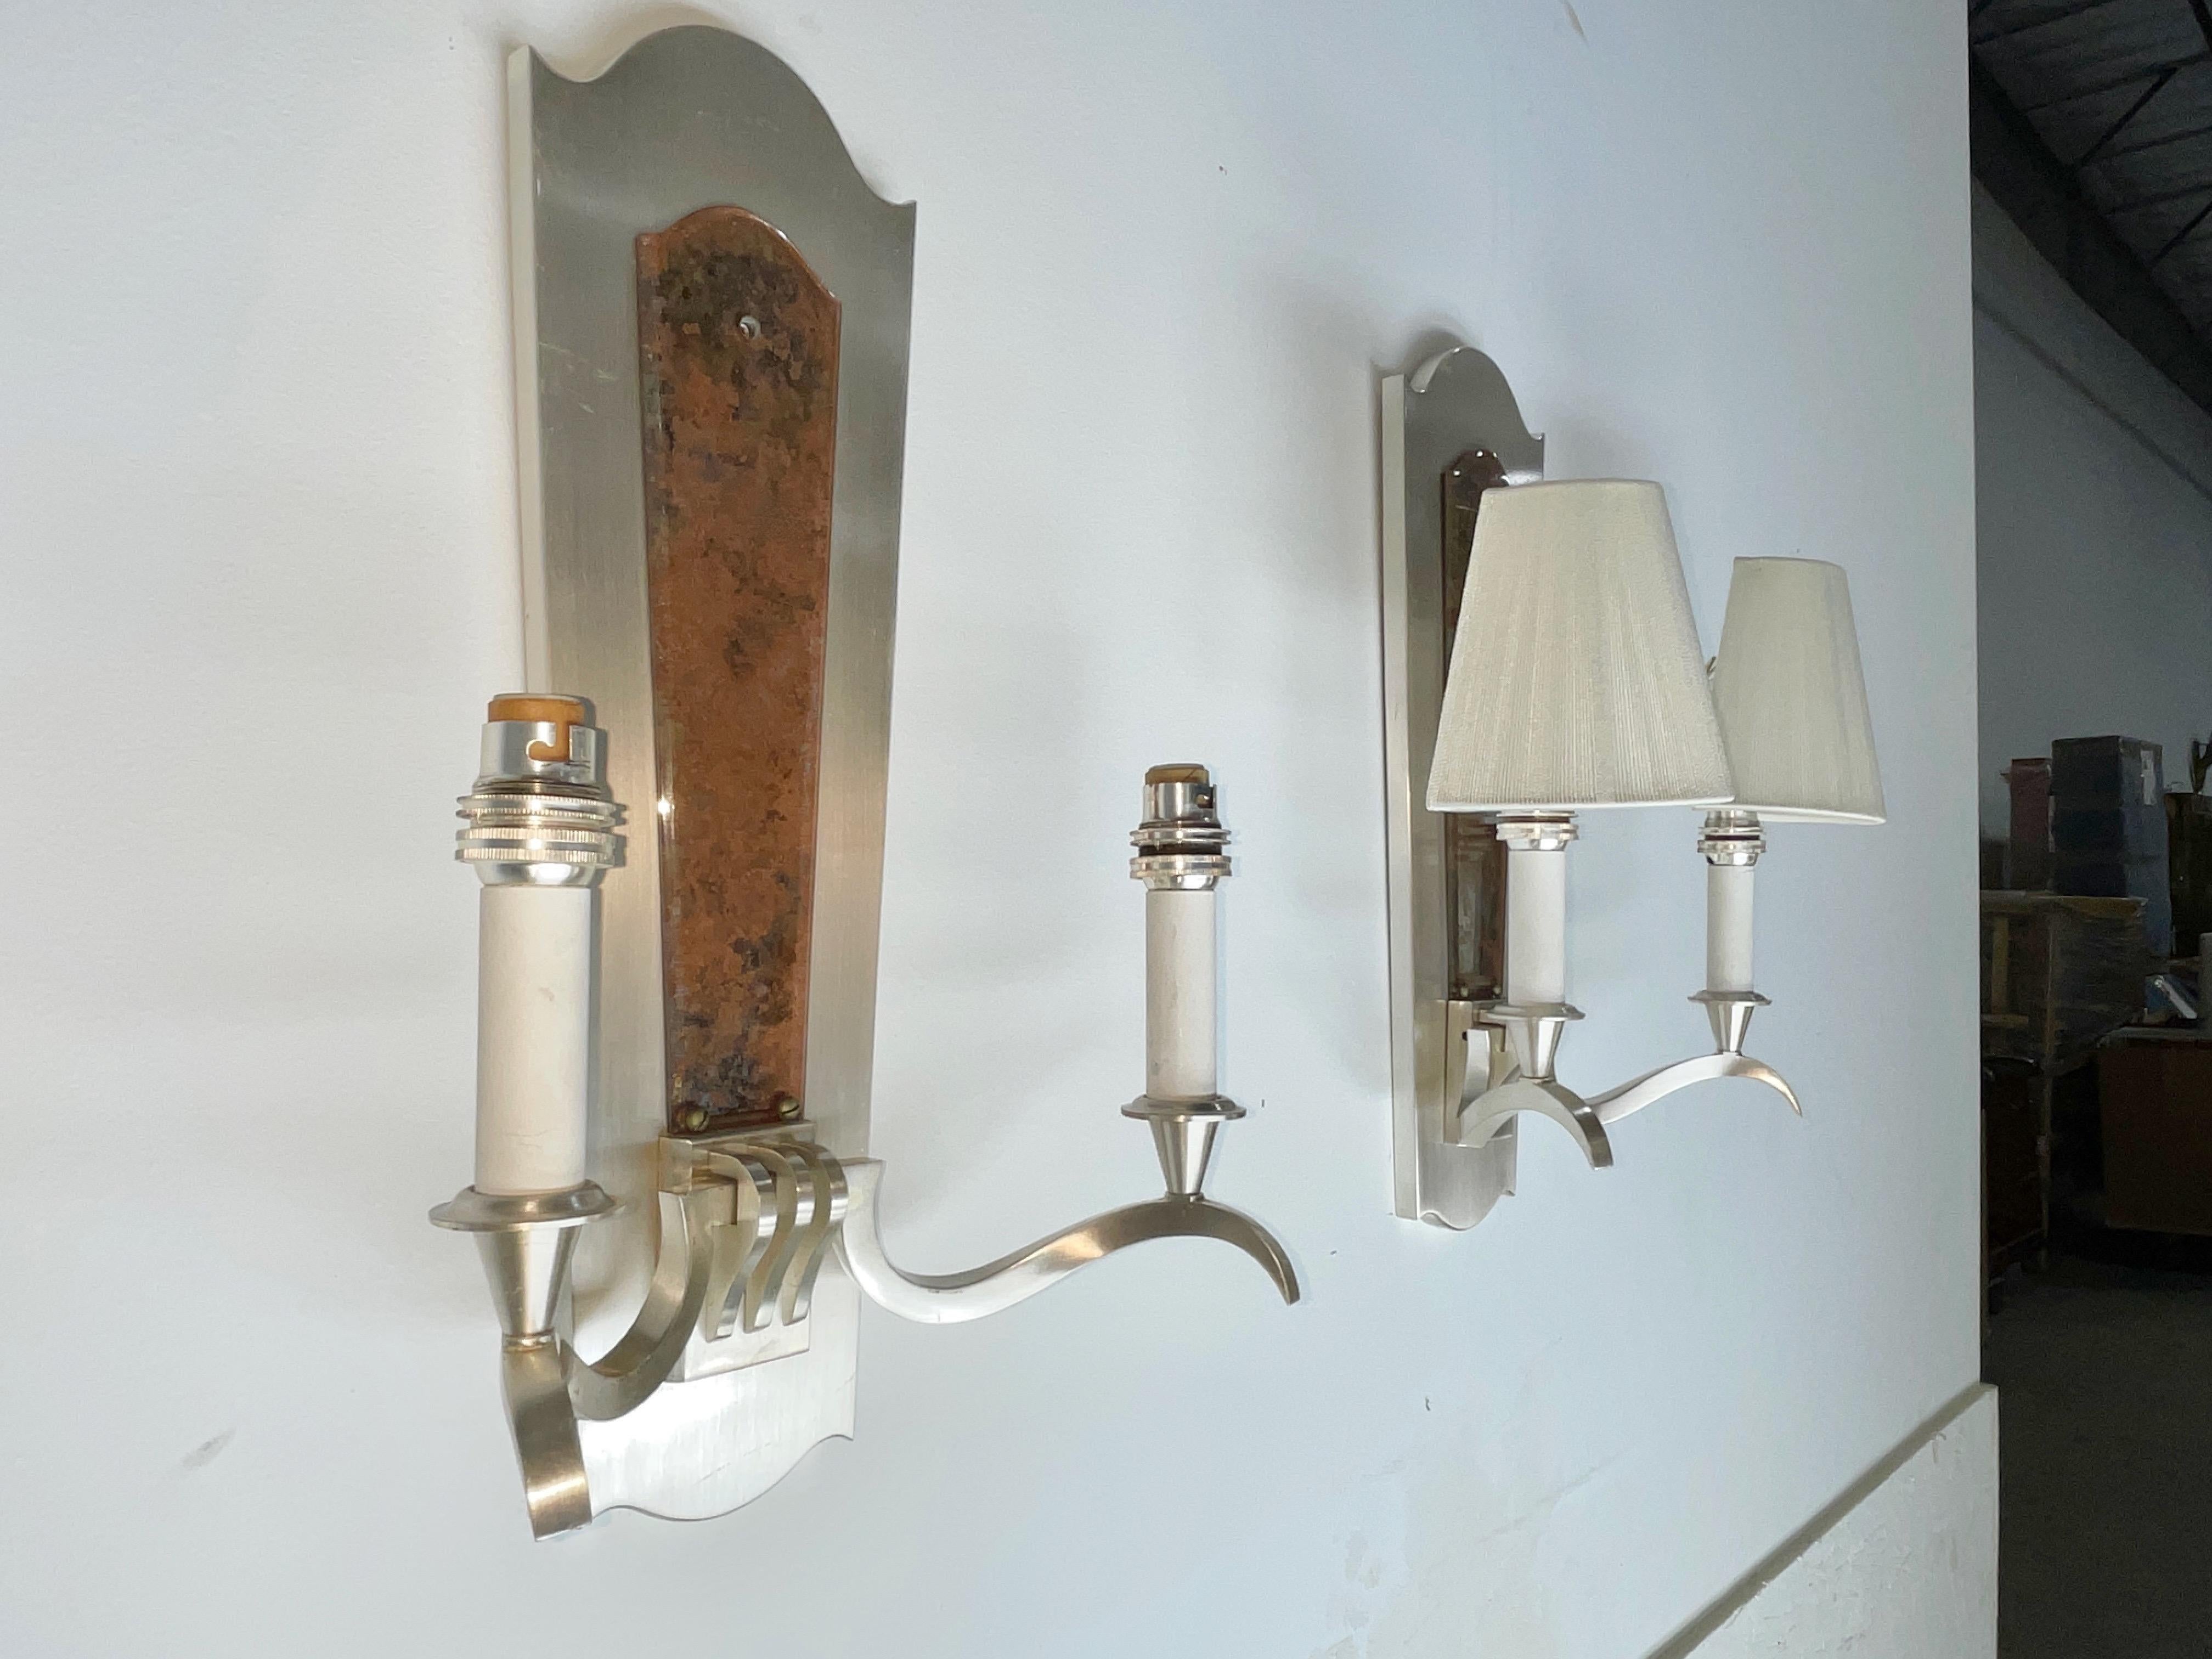 Pair of Genet et Michon Sconces in Brushed Nickel and Eglomise For Sale 1